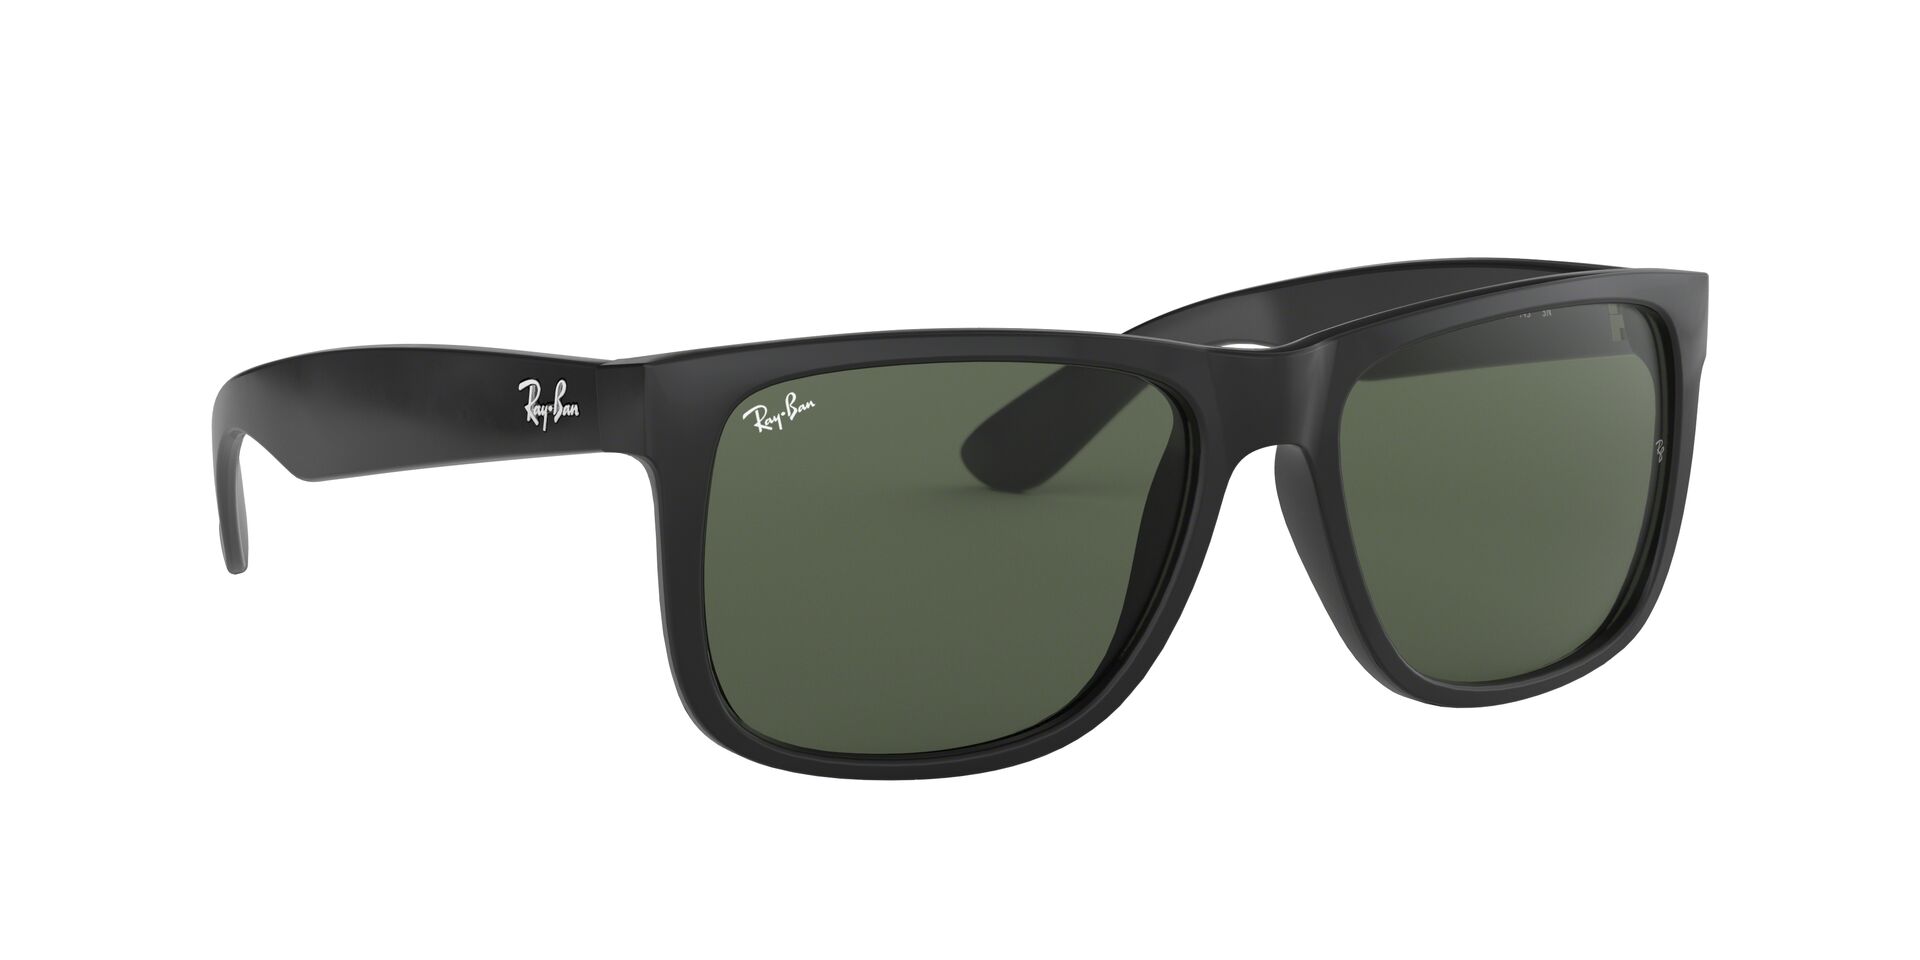 Buy Ray-Ban Justin Collection Sunglasses Online.